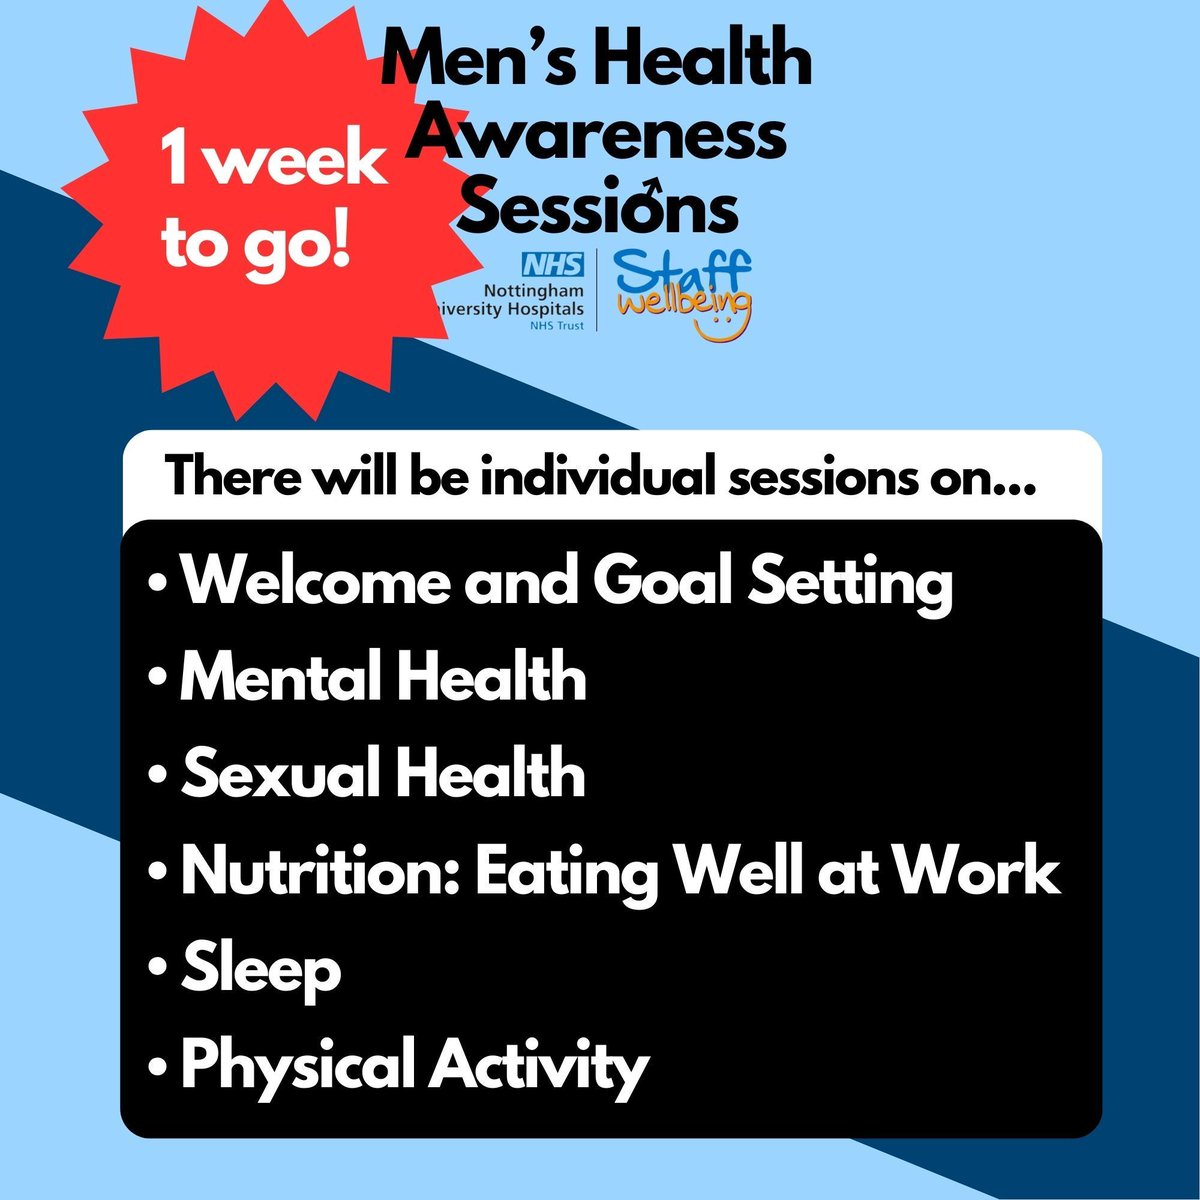 ONE WEEK TO GO! Our Men's Health Awareness Day is being held in person at QMC on Wednesday 10th April, not got your ticket booked yet? Book yours here: buff.ly/3PpXKSm